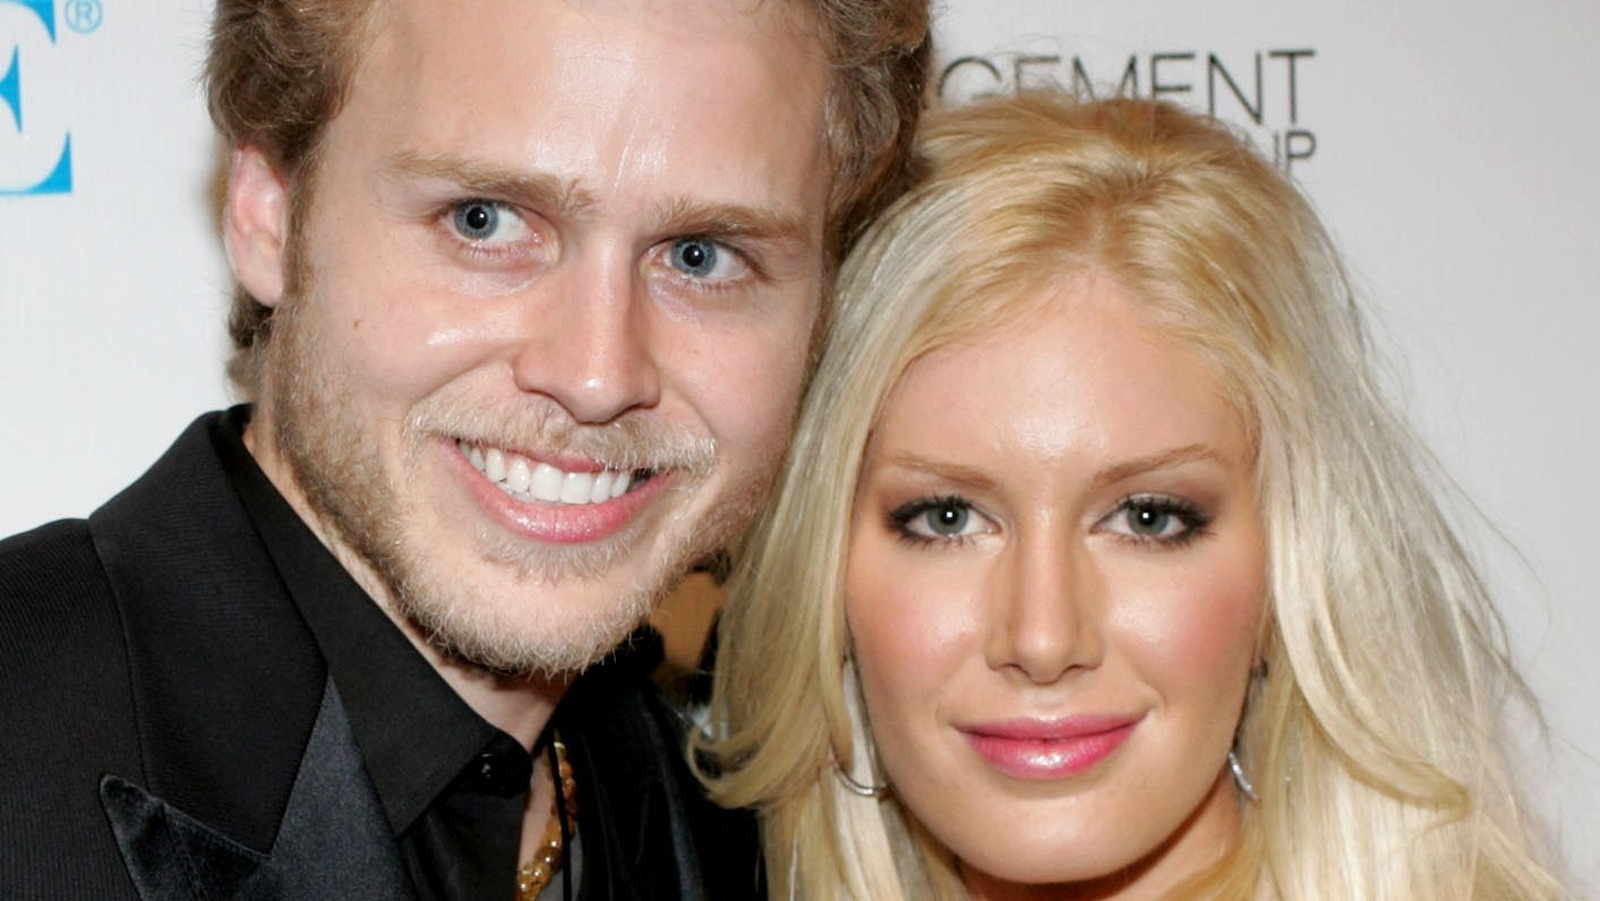 How Much Money Did Heidi Montag And Spencer Pratt Spend On Doomsday